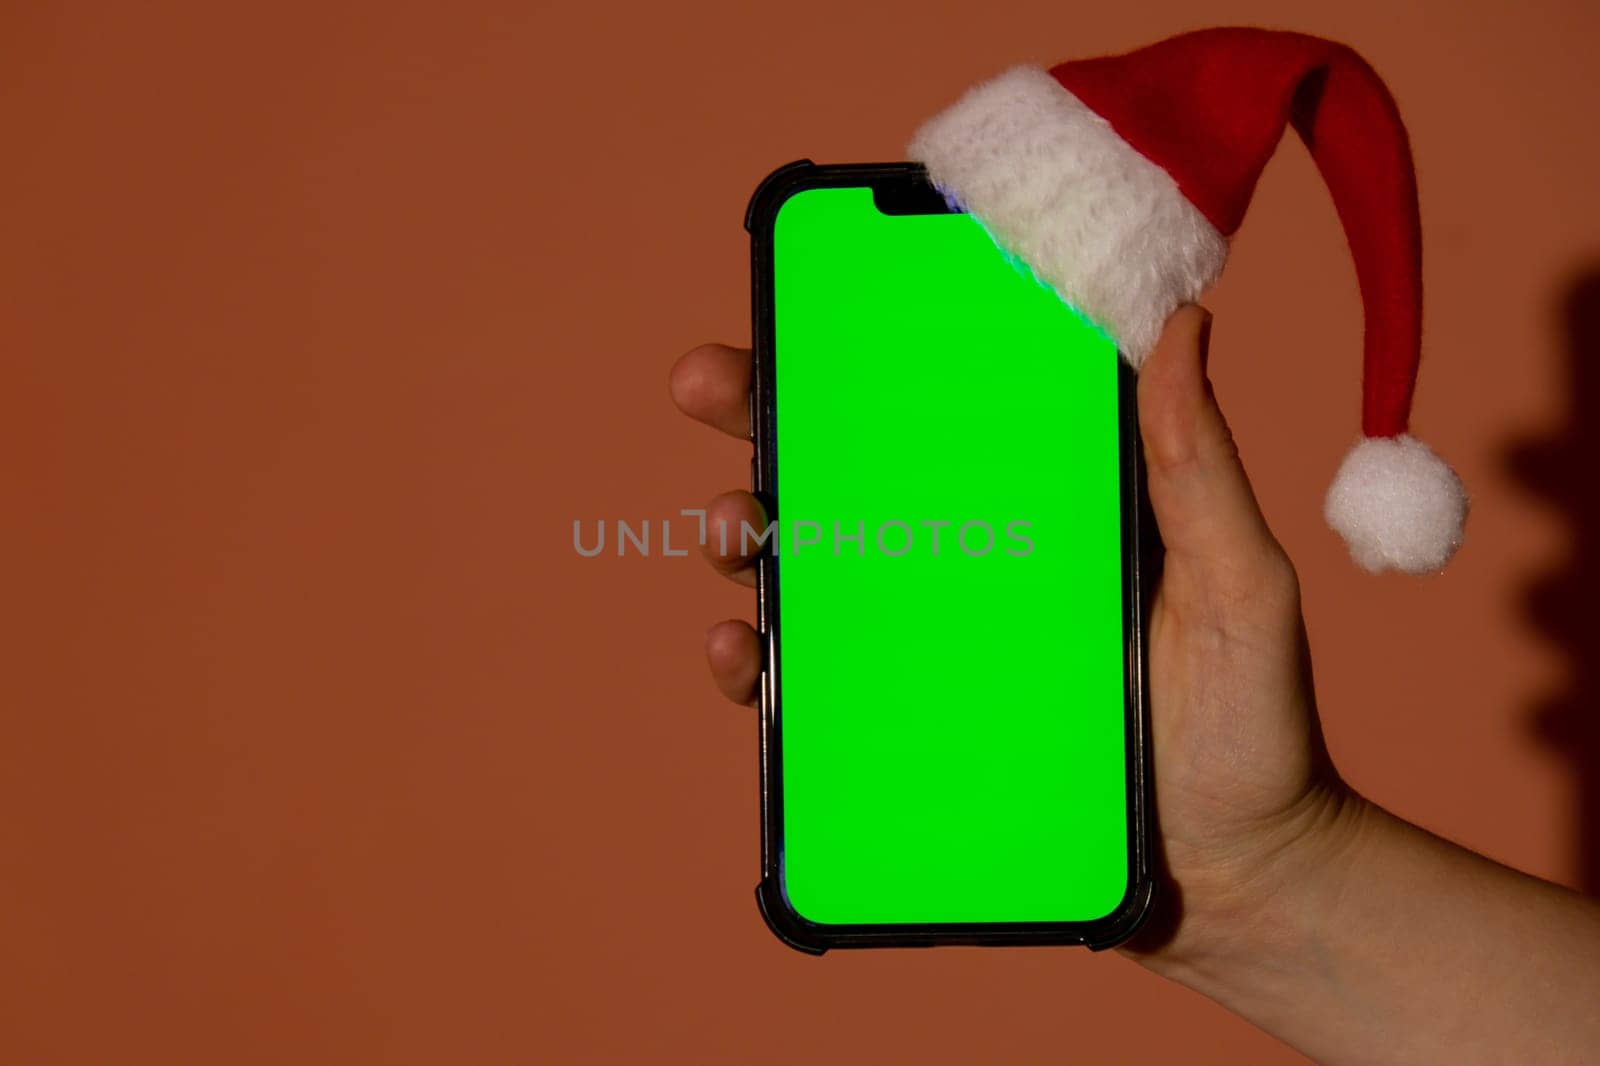 Mobile phone dressed in Santa-Claus red-white hat with chroma key screen against red background. Concept for Christmas or New Years holidays. Female Hand holding Blank cell phone. Digital gadget, technology copyspace wireless wishlist concept. Social media advertisement